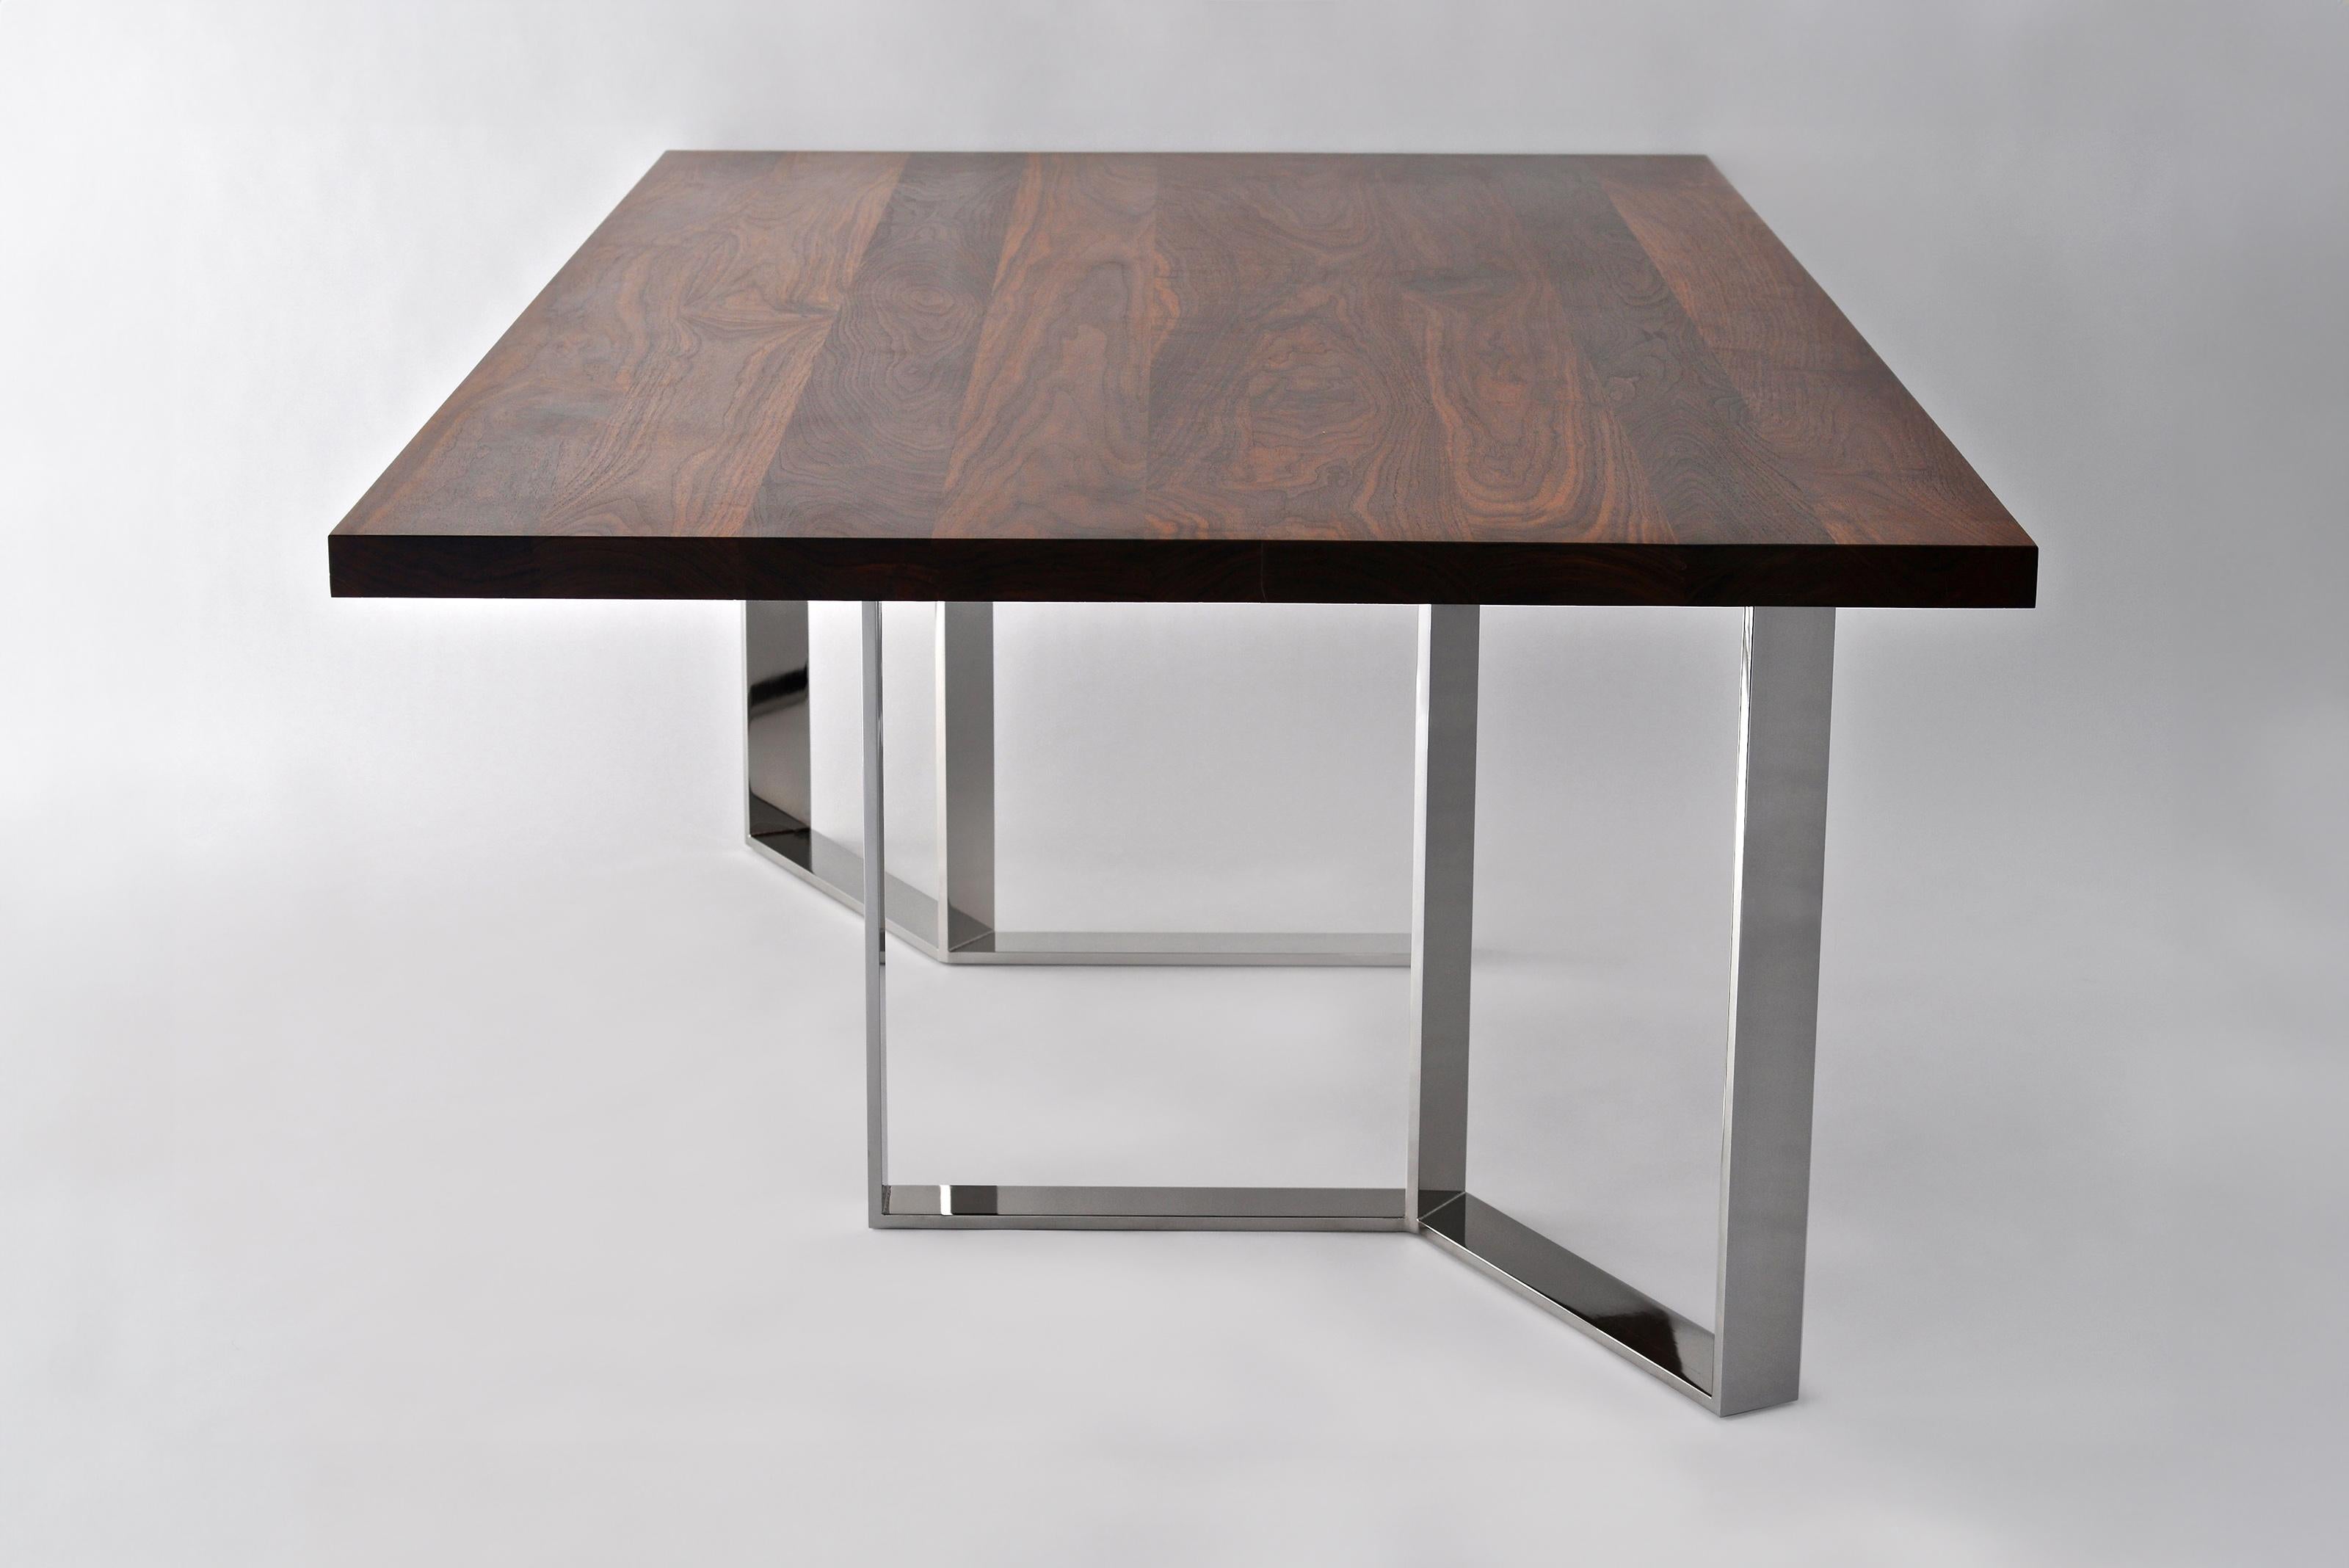 Roundhouse Table by Phase Design
Dimensions: D 116.8 x W 243.8 x H 73.7 cm. 
Materials: Polished chrome and walnut. 

Solid steel bar with solid wooden top, available in walnut, white oak, ebonized oak. Steel bar available in polished chrome, smoked